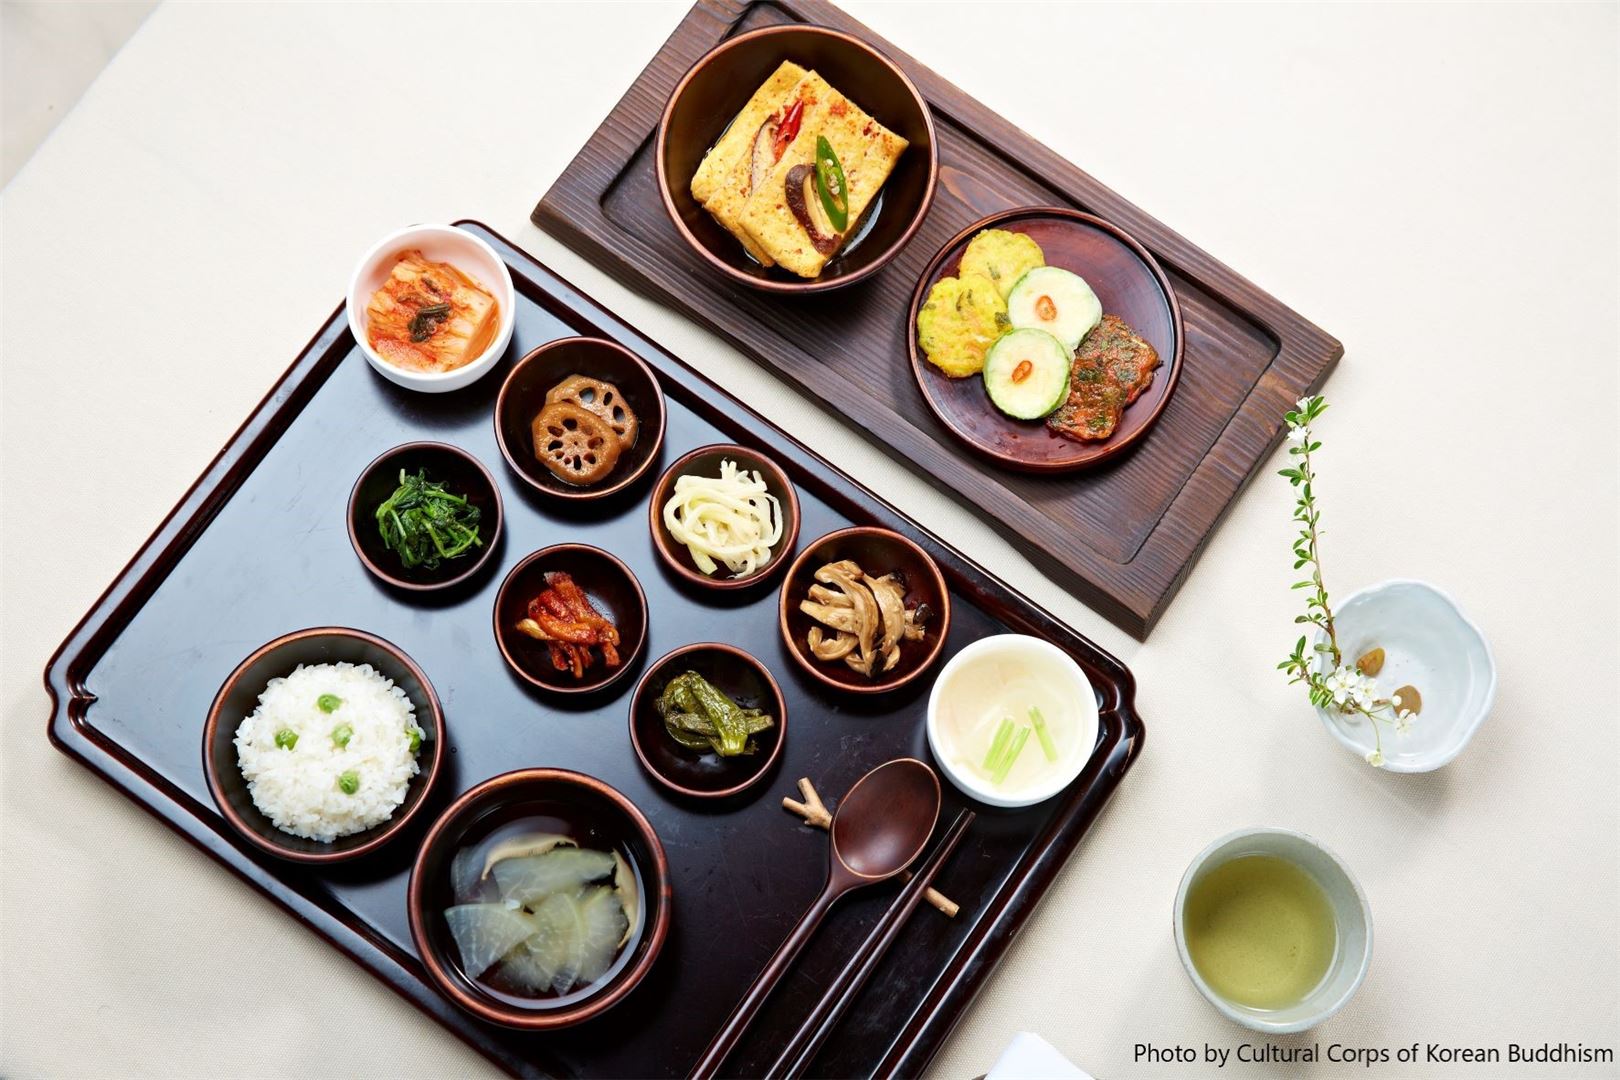 Korean Cuisine: An Eclectic Experience for Foodie Travelers